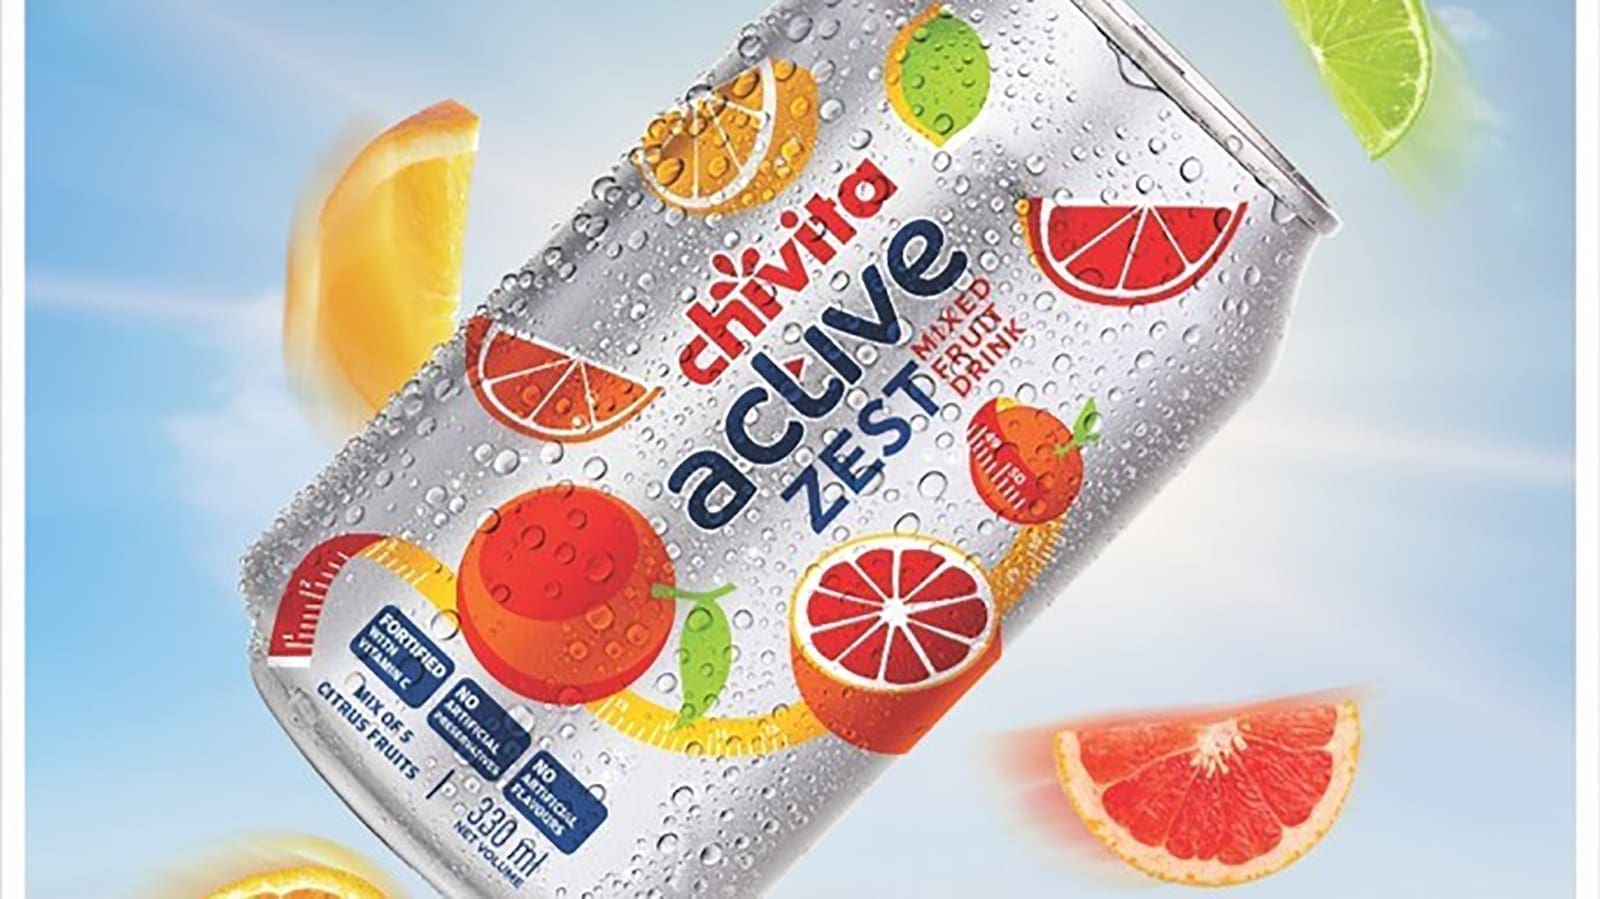 CHI Limited launches fruity beverage bursting with vitamins, minerals dubbed Chivita Active Zest